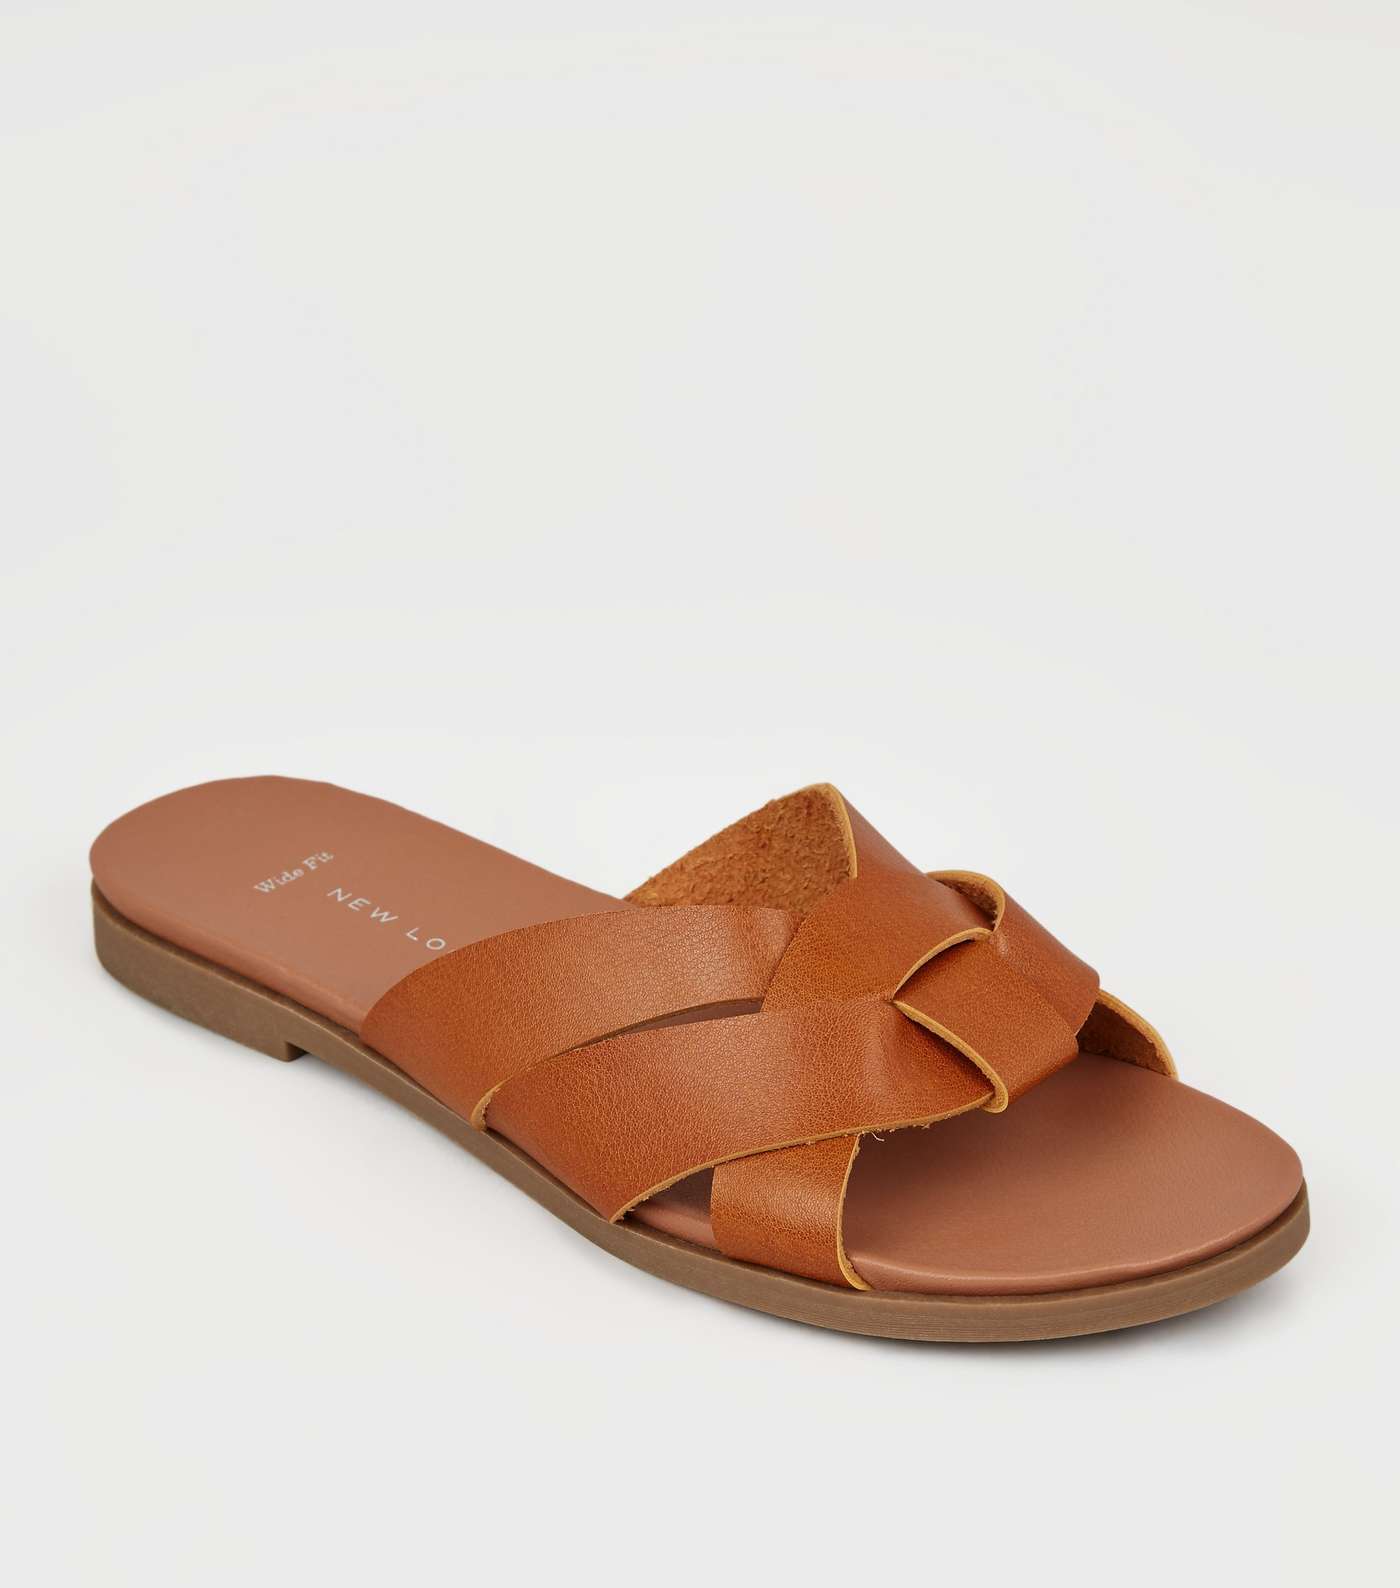 Wide Fit Tan Leather-Look Footbed Sliders 